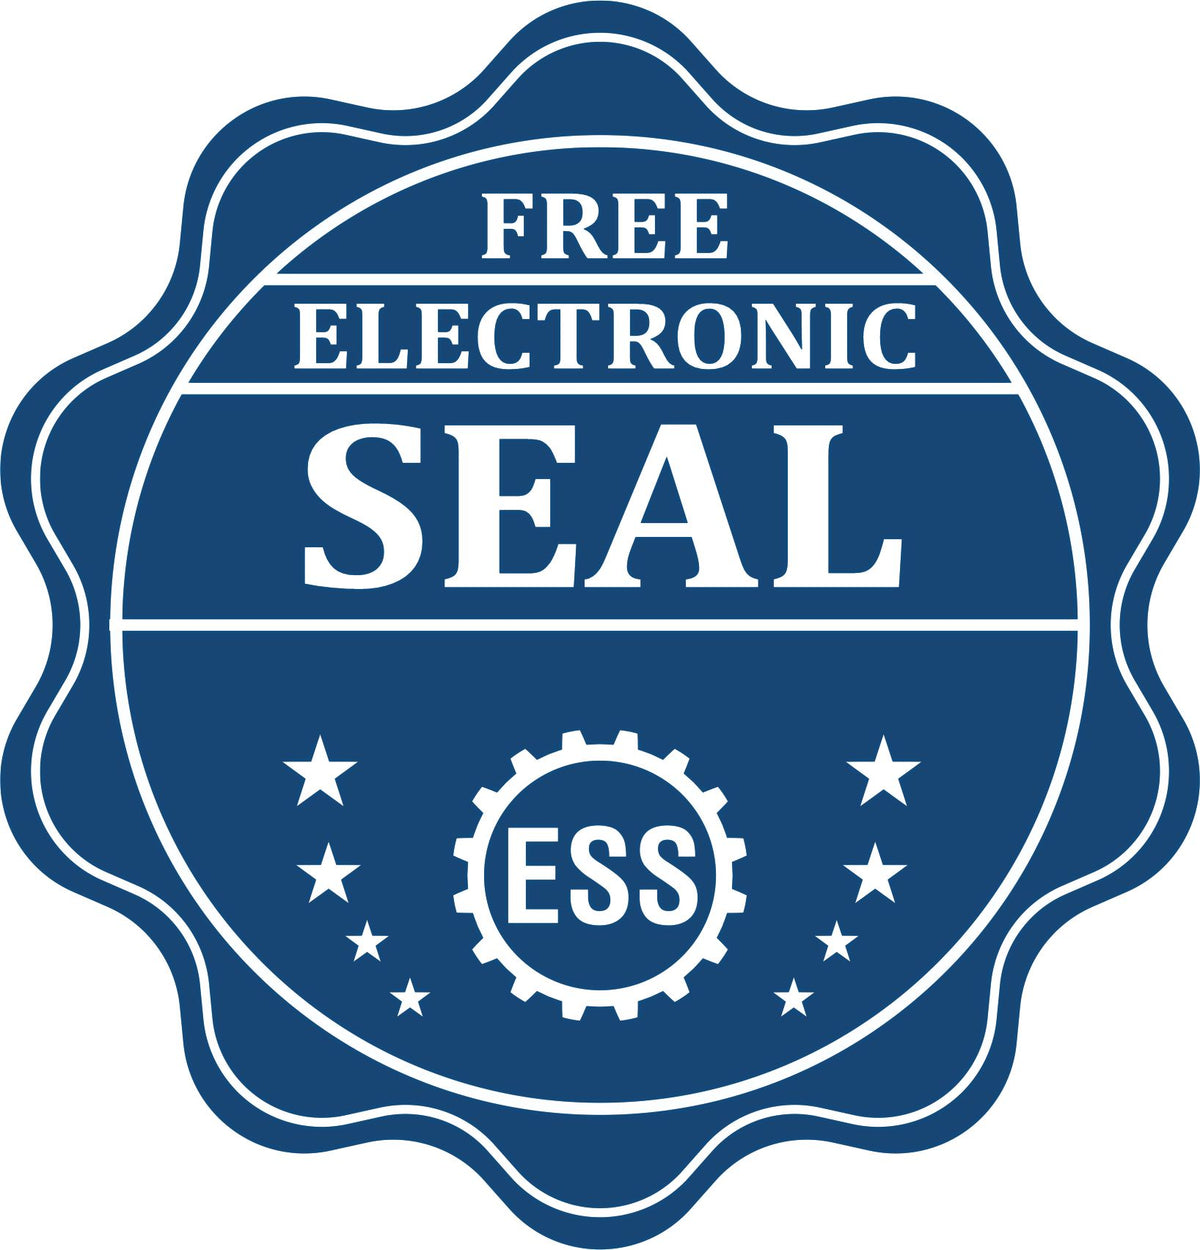 A badge showing a free electronic seal for the Heavy Duty Cast Iron Maine Architect Embosser with stars and the ESS gear on the emblem.